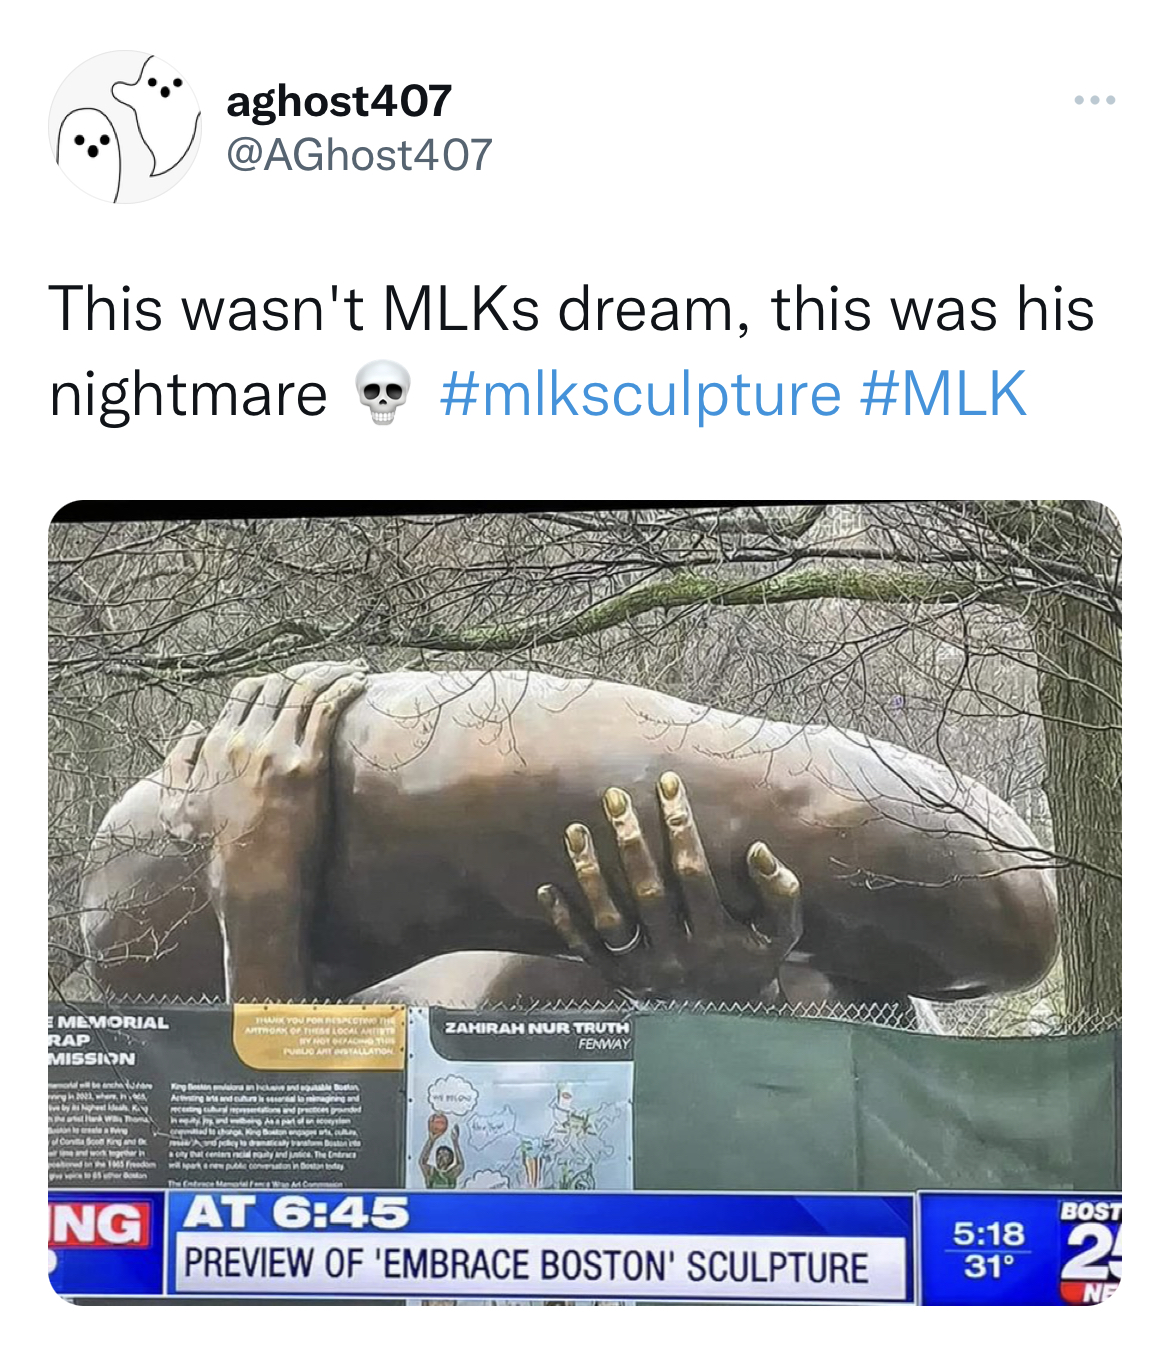 MLK Jr. Sculpture memes - Statue - aghost407 This wasn't Ks dream, this was his nightmare Memorial Mission Ng At Zahrah Nur Truth Fay 502 Preview Of 'Embrace Boston' Sculpture Bost 2 31 Ne